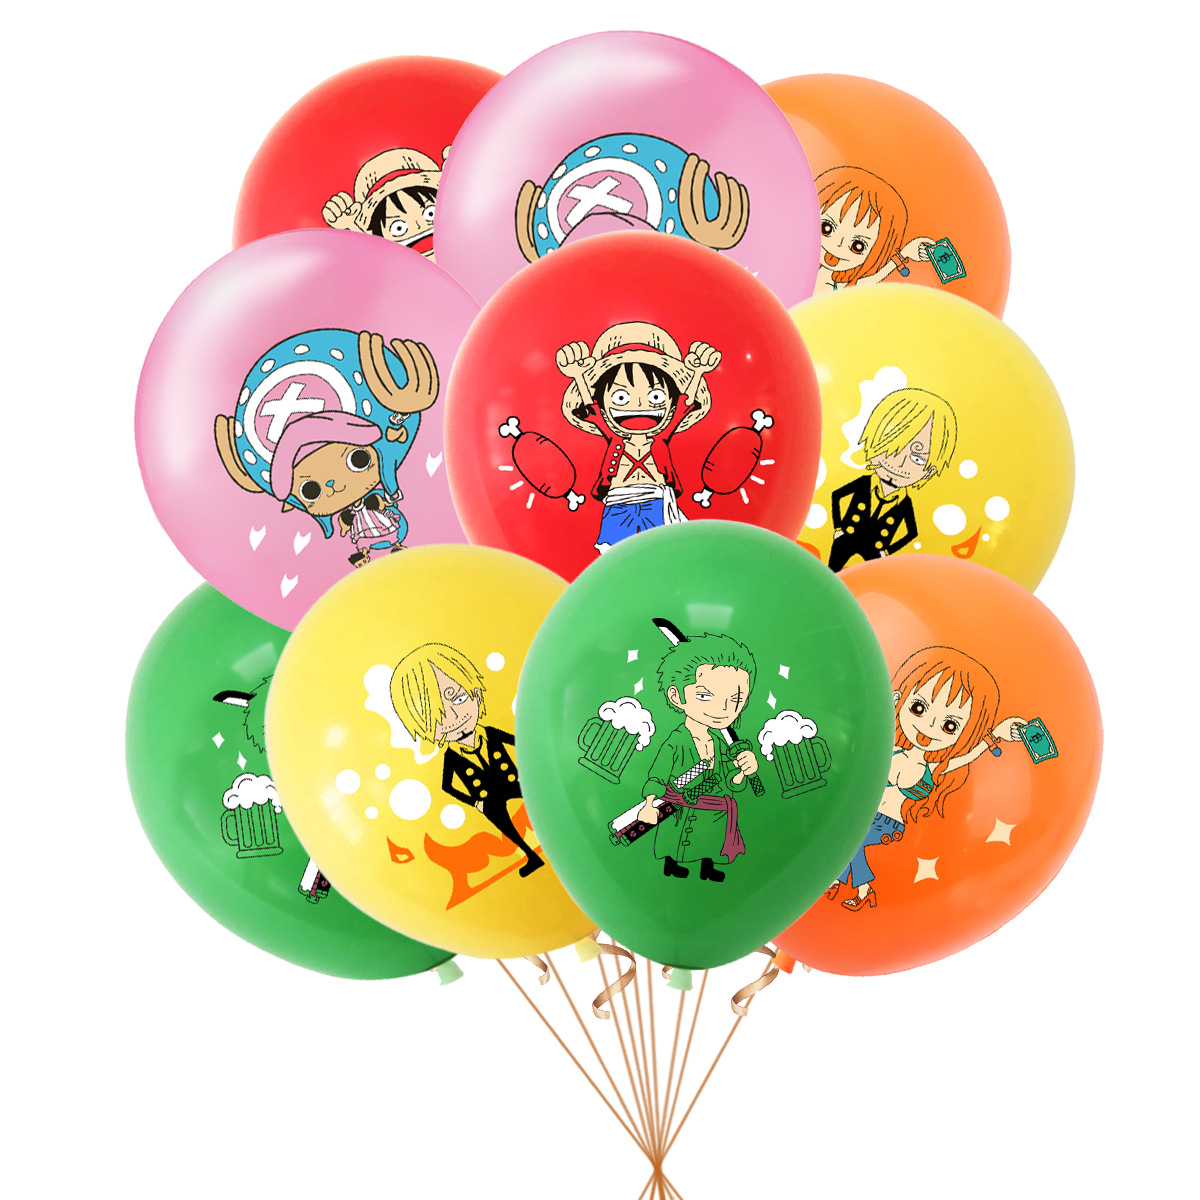 One Piece Birthday Party Rubber Balloons Decoration Skull Luffy Chopper Balloon Birthday Decorations